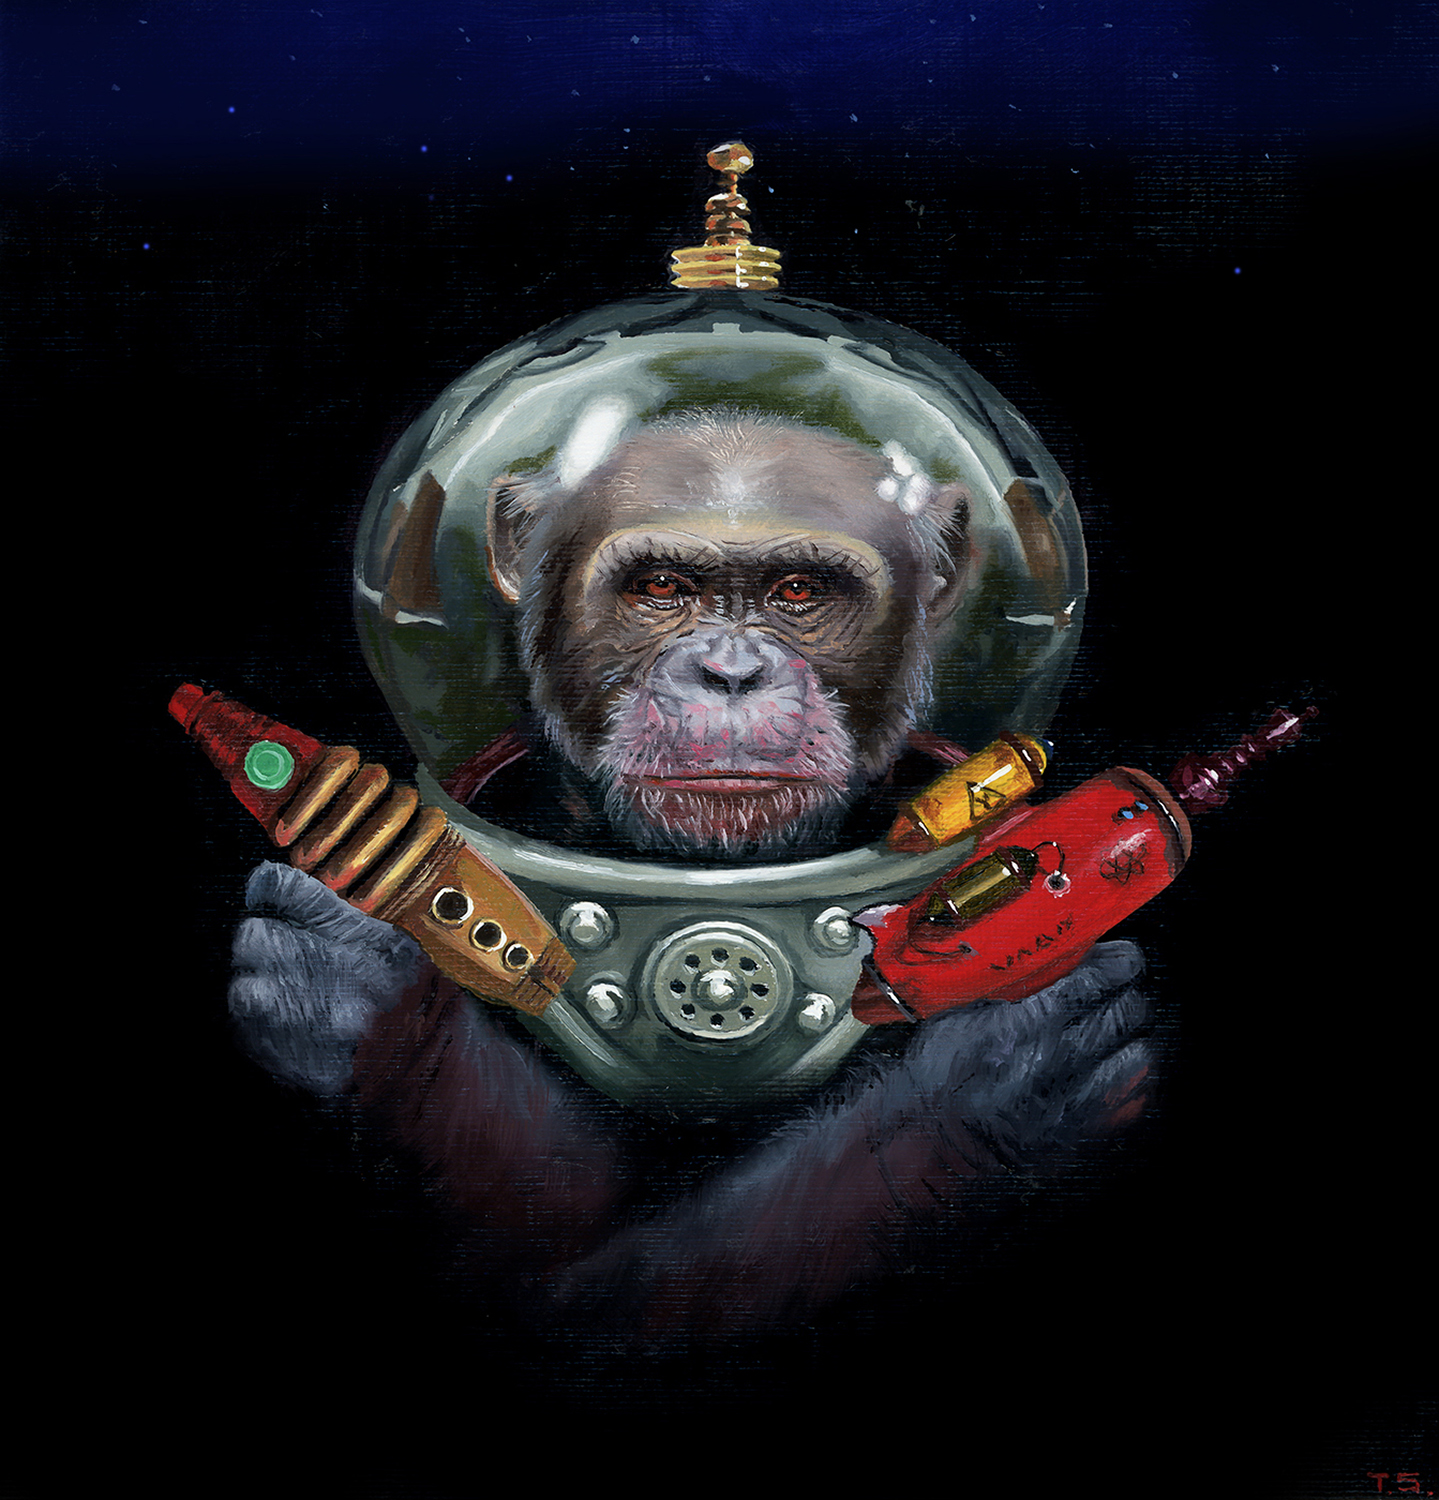 A monkey in a space suit holding two space guns - Tony South - Slowly and Surely They Drew Their Plans Against Us